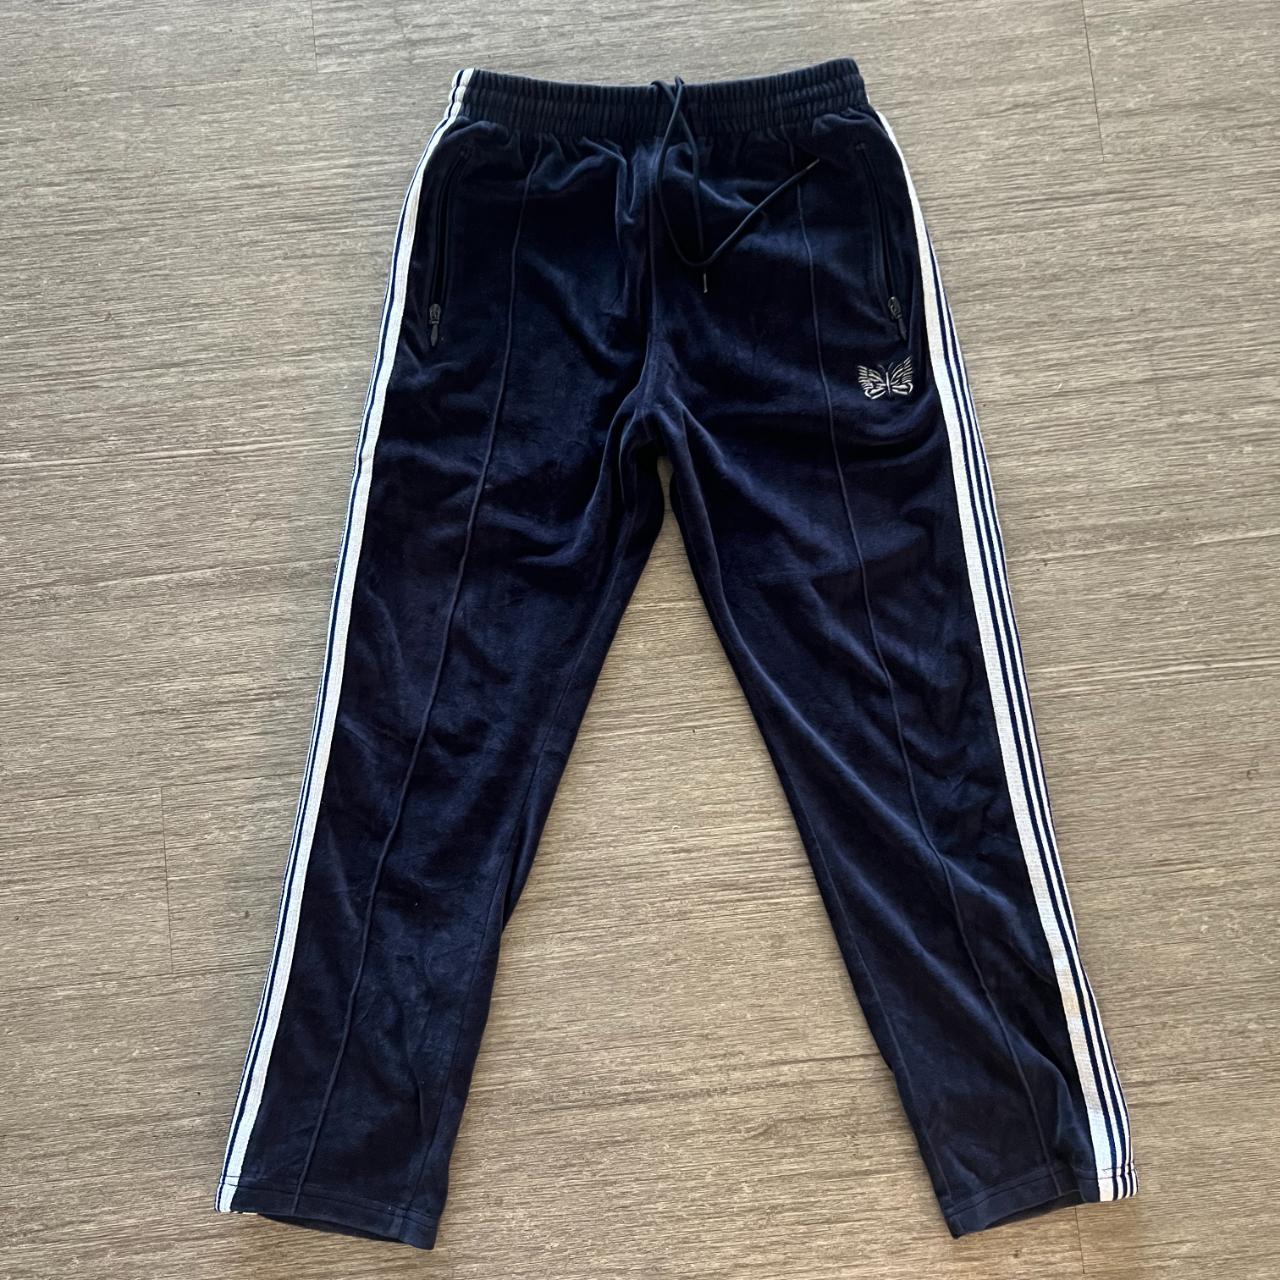 Needles Velour track pants Blue and silver Size... - Depop